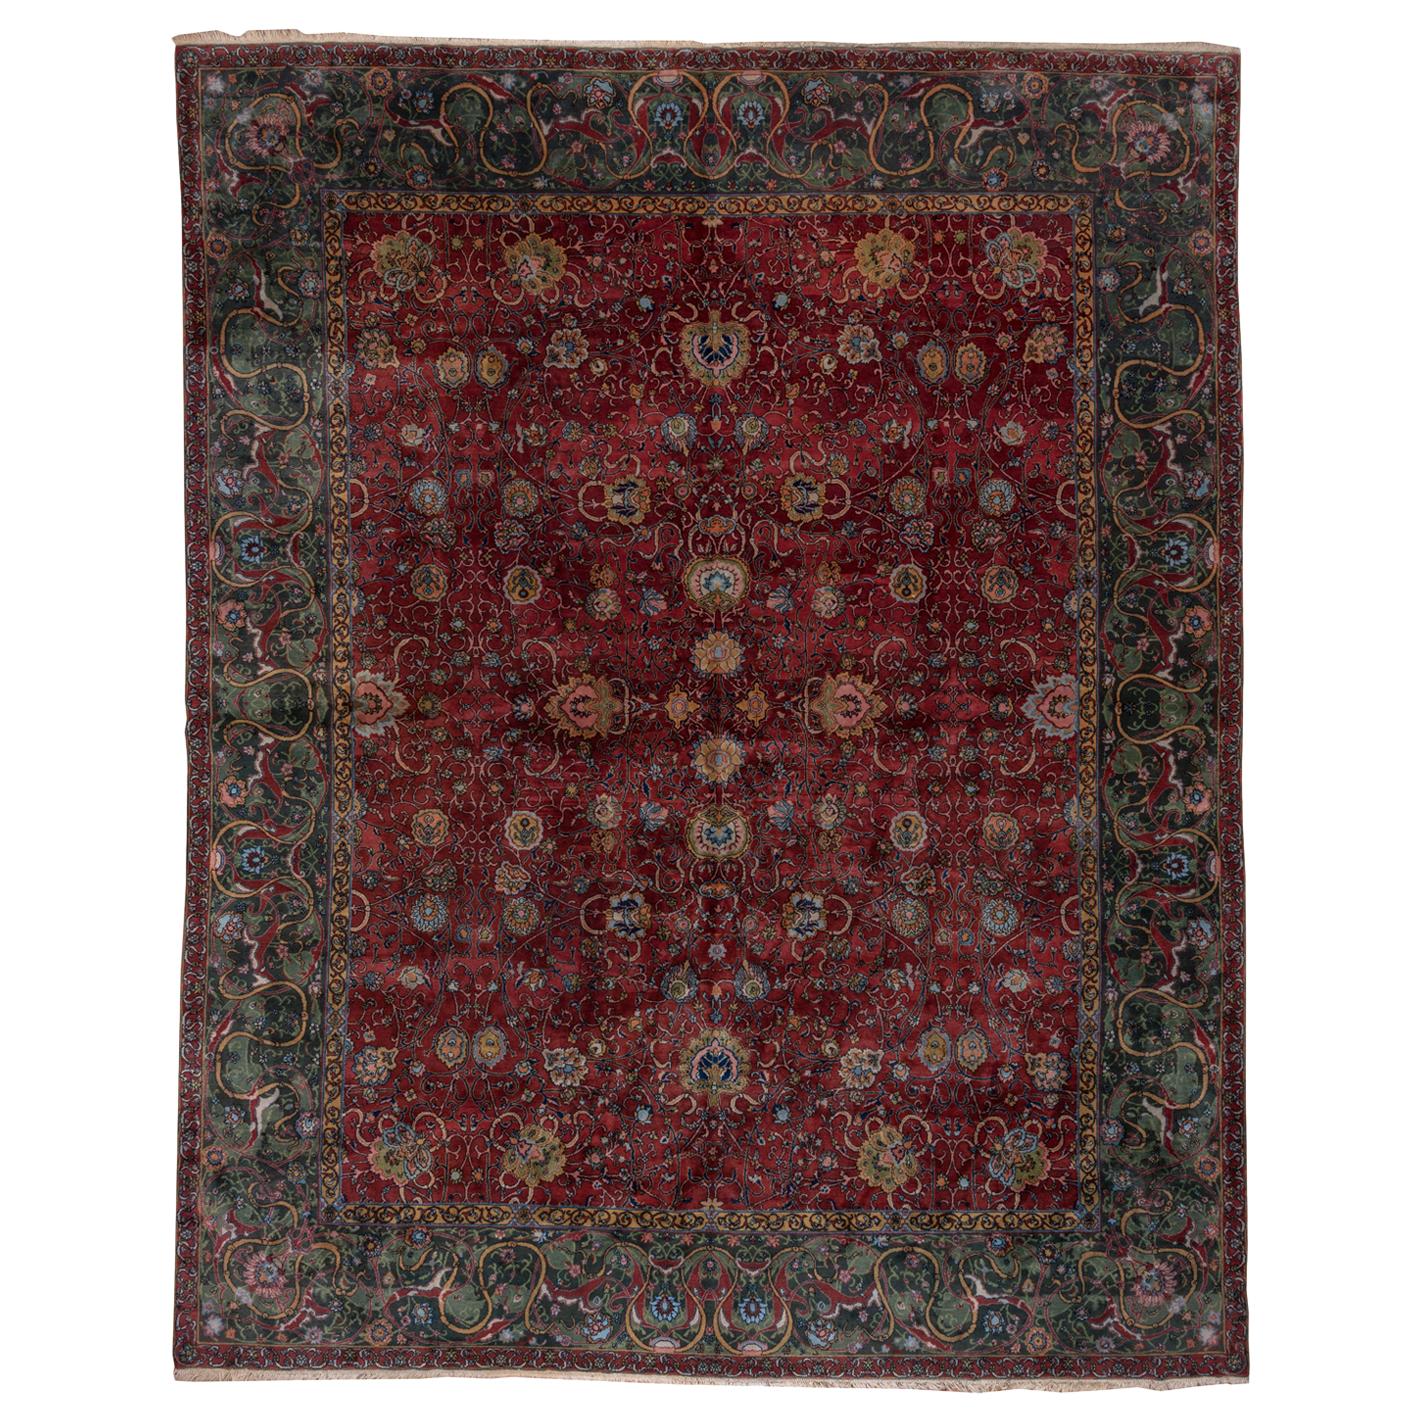 1920s Antique Indian Lahore Rug, Burgundy All-Over Field, Dark Green Borders